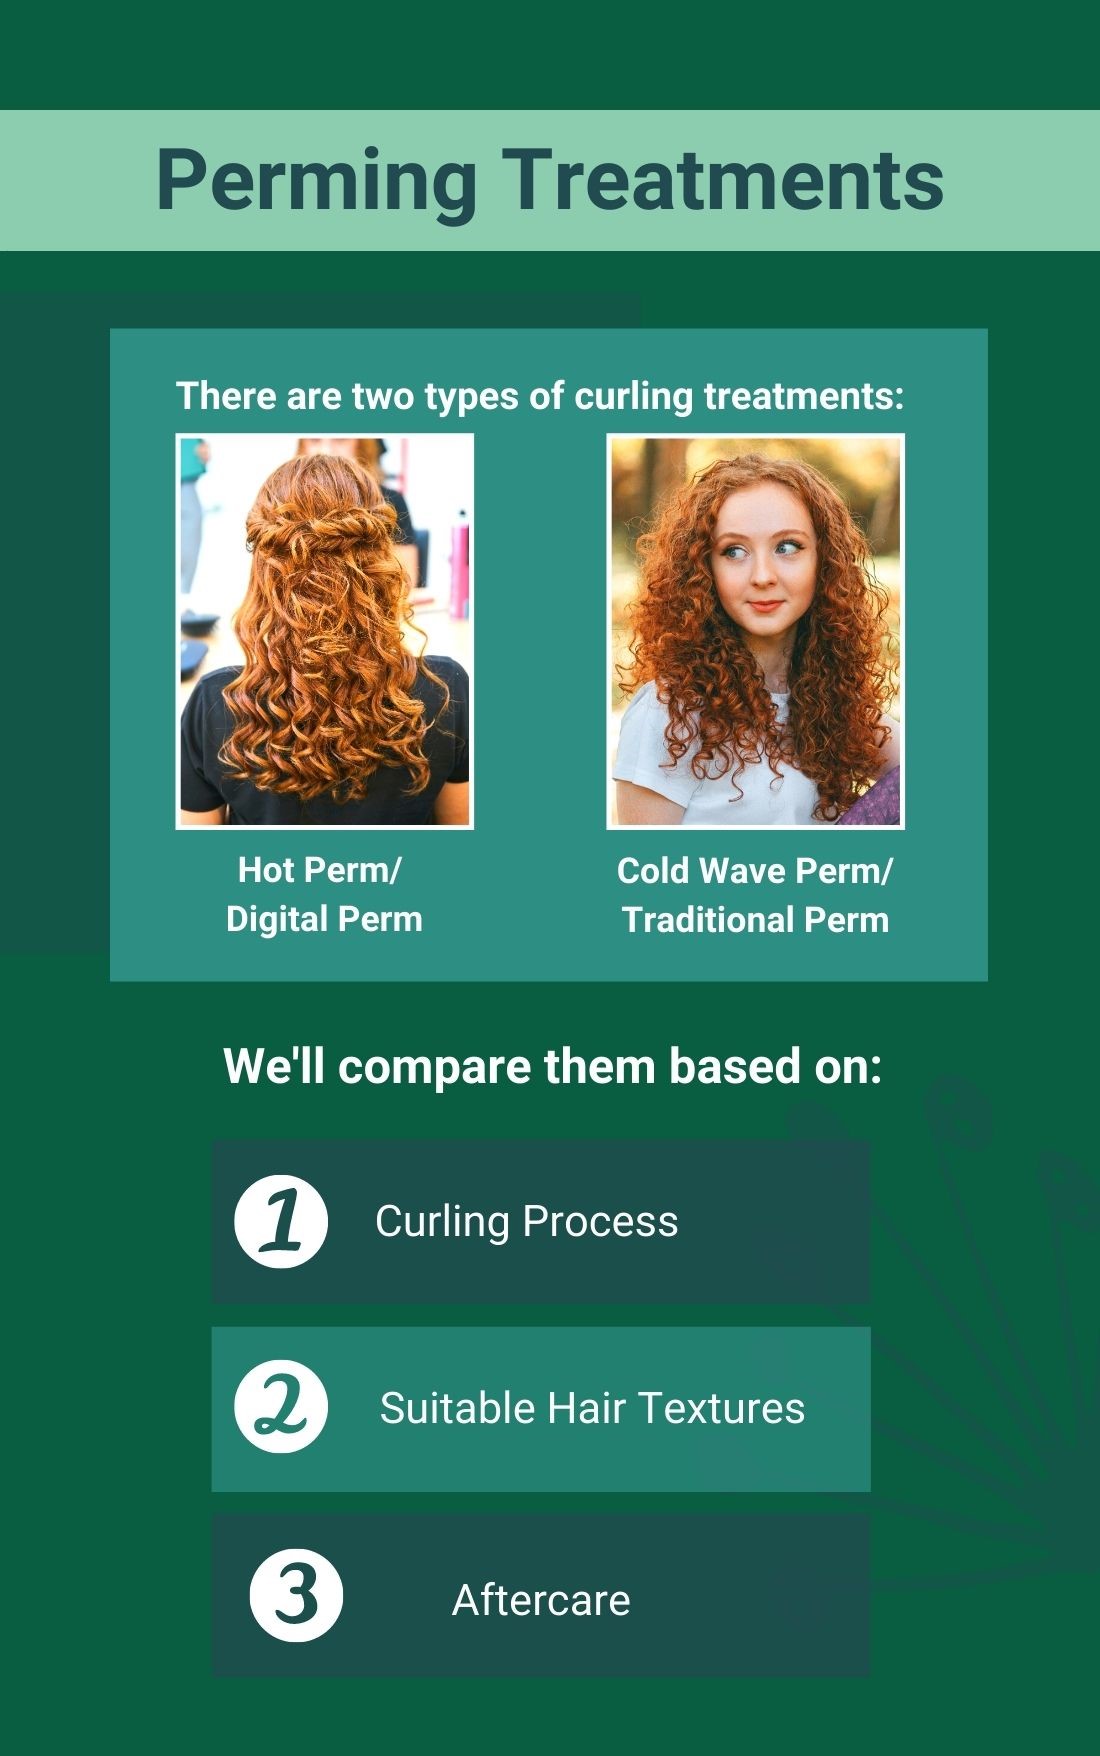 Hot vs Cold Perm: What is the Difference? | Yoon Salon